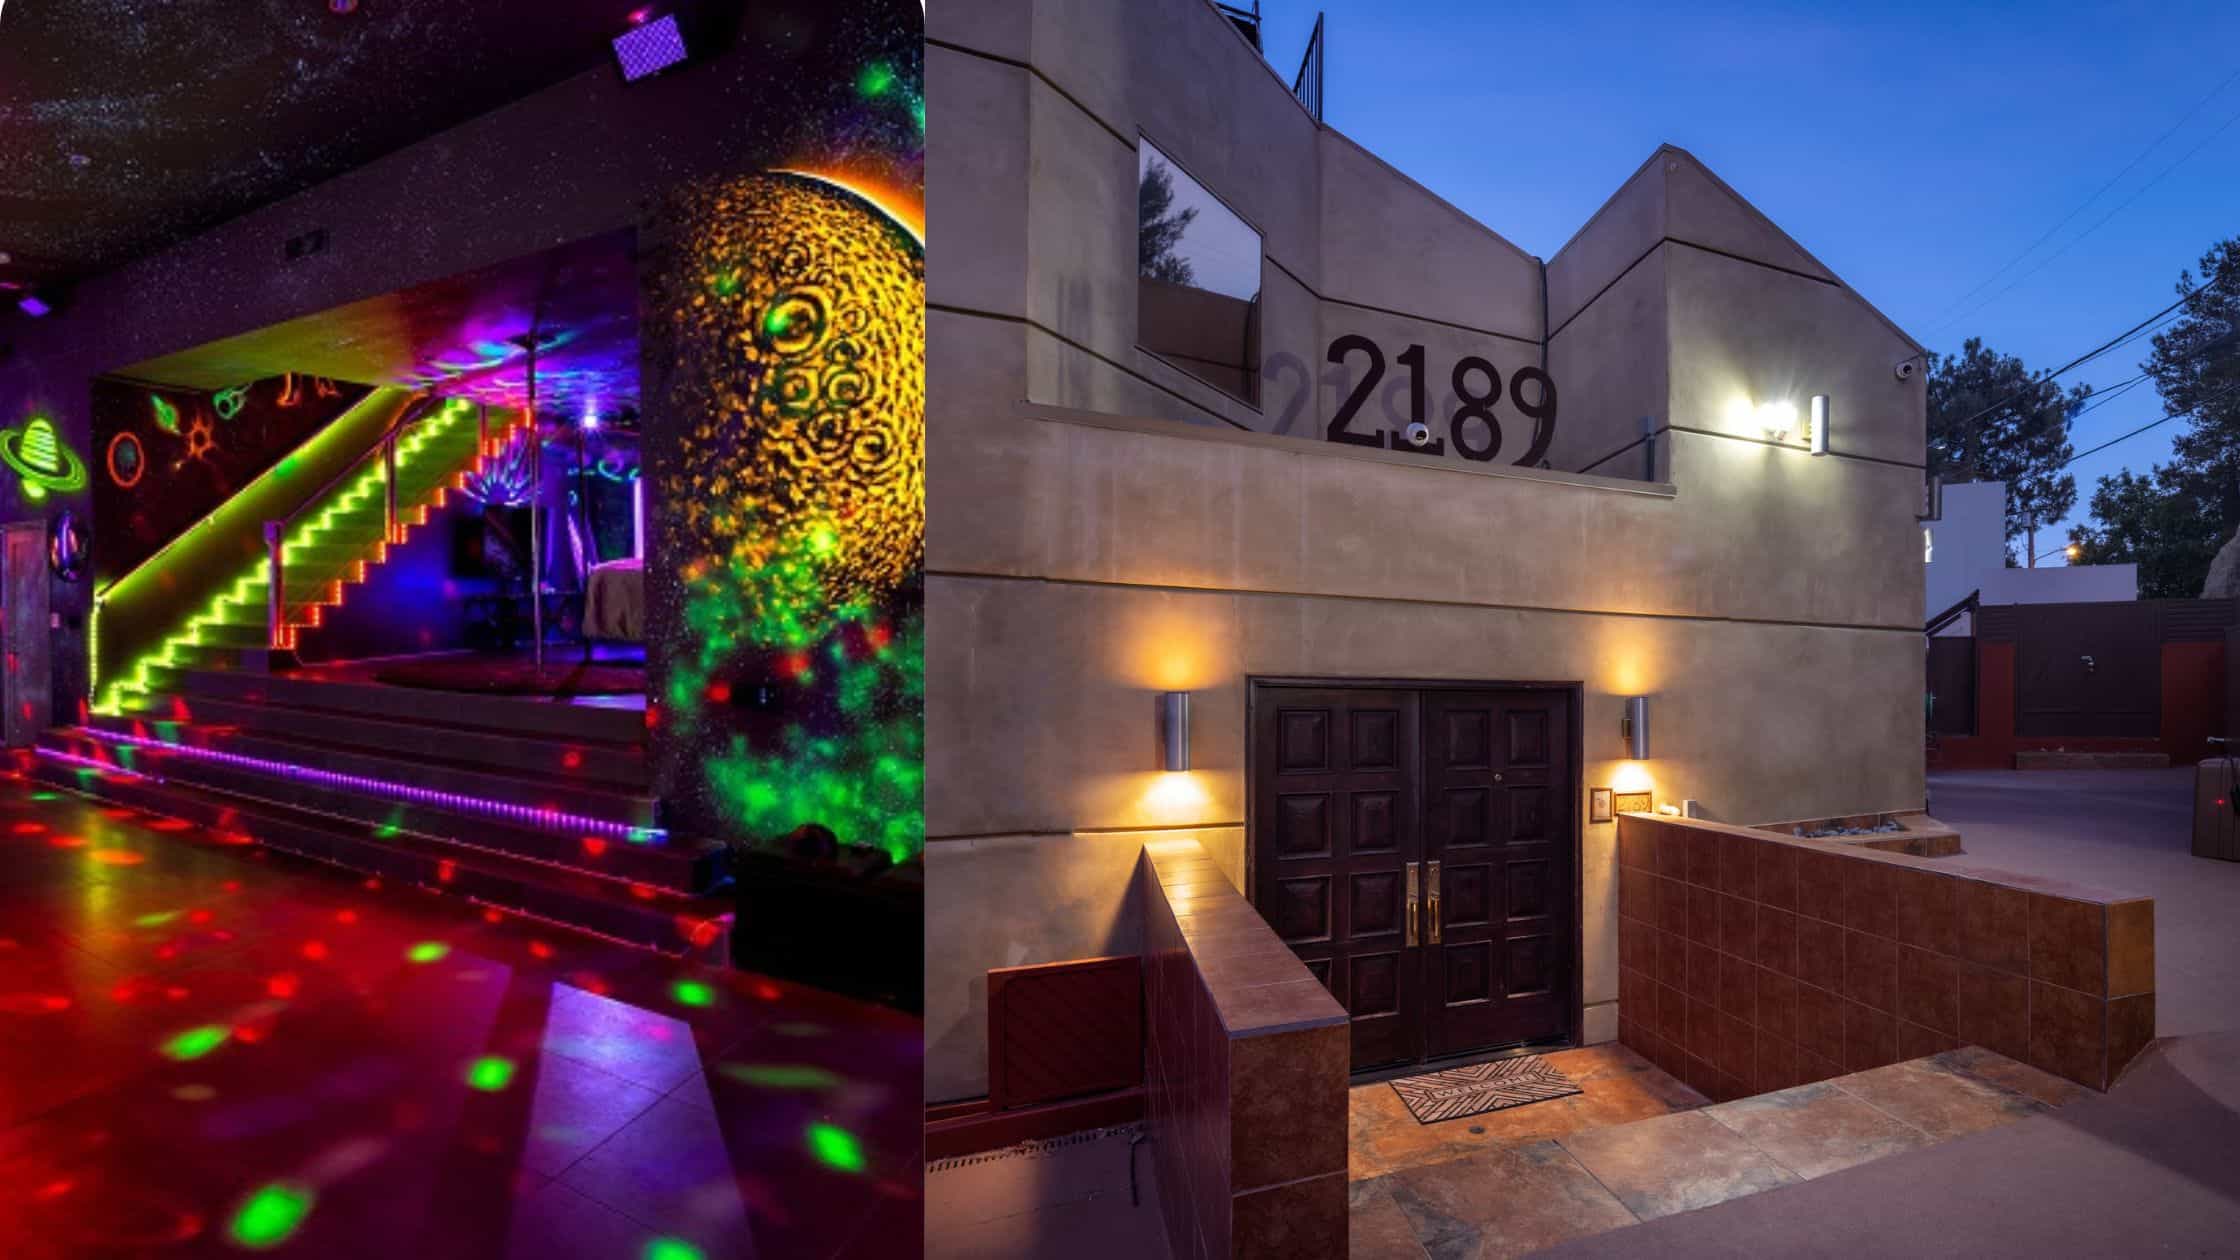 Los Angeles House of Sin and its colorful nightclub